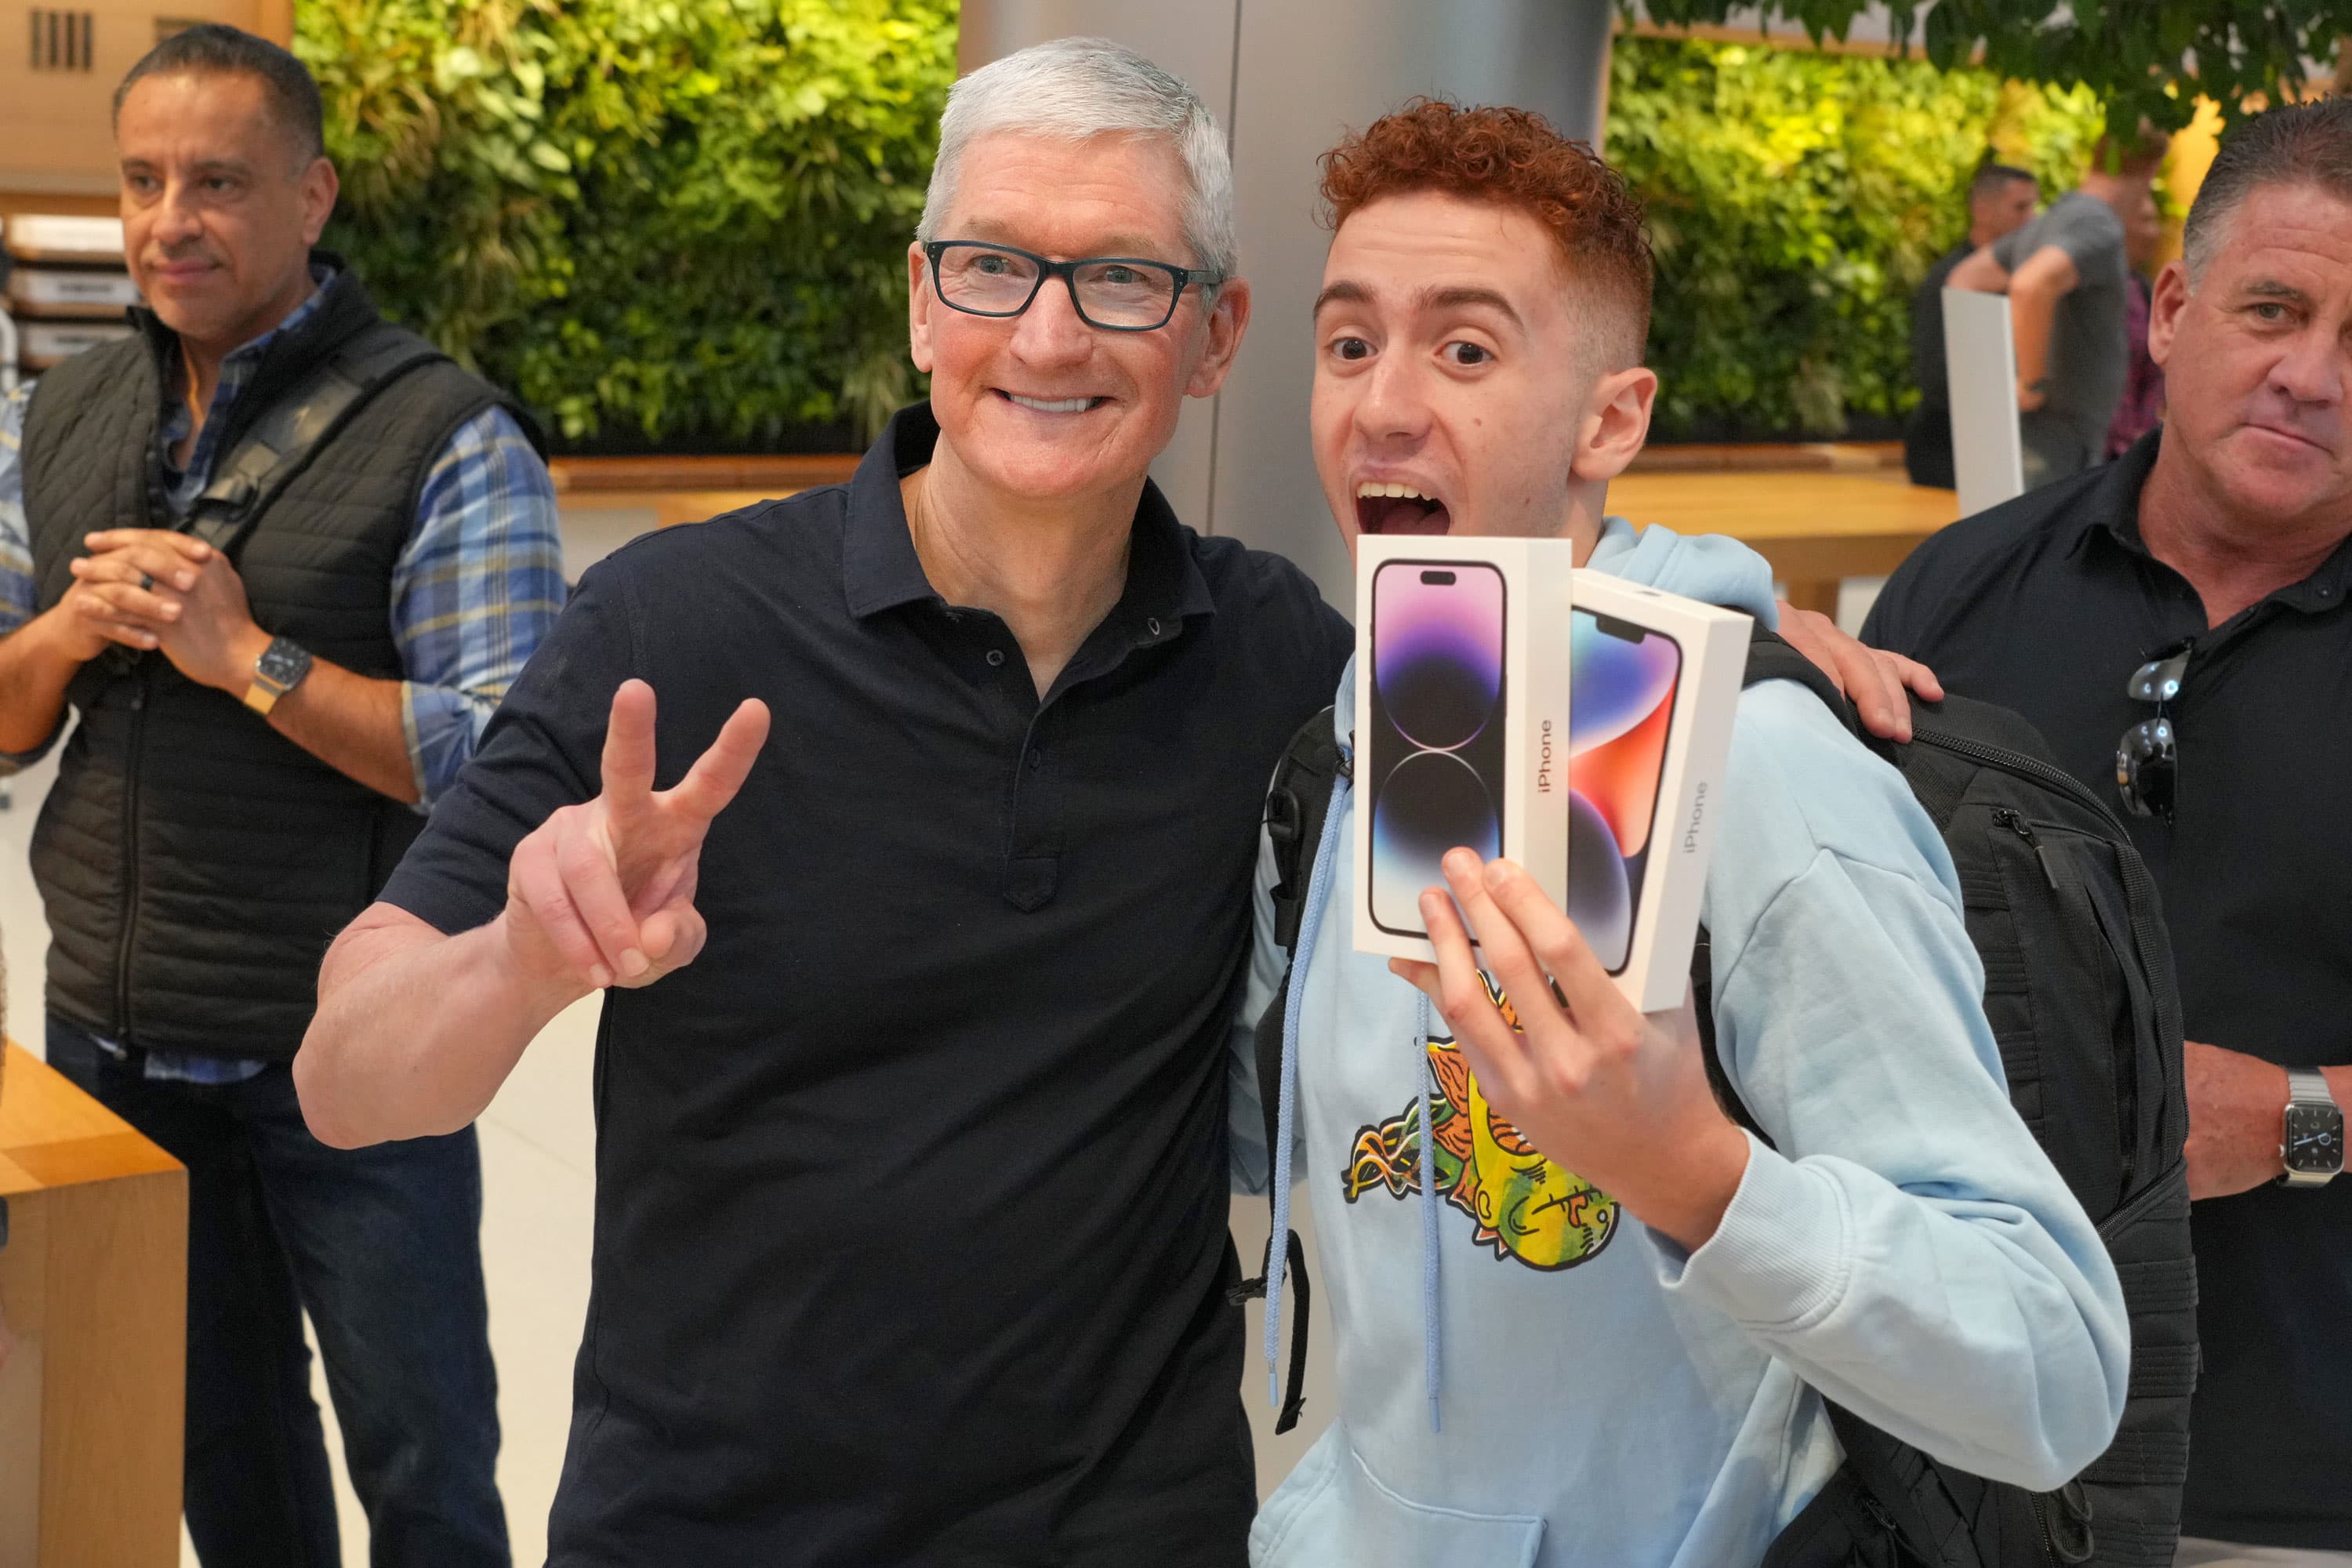 Apple launches iPhone 14 as customers line up to meet Tim Cook and get new tech